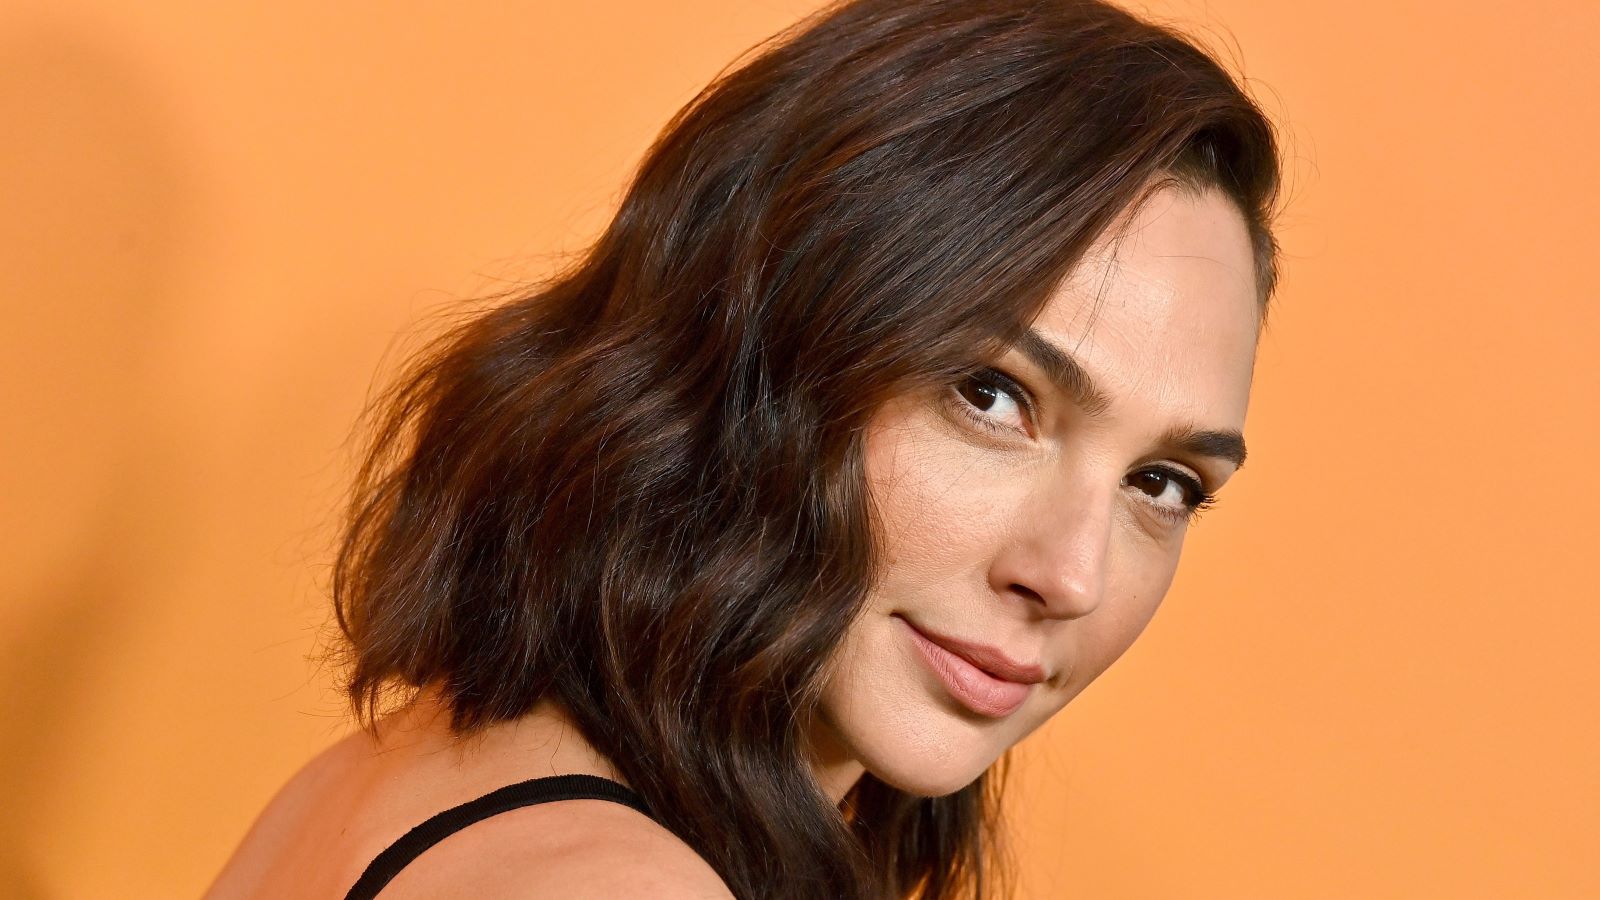 Incoming Evil Queen Gal Gadot celebrates 85 years of Disney’s ‘Snow White’